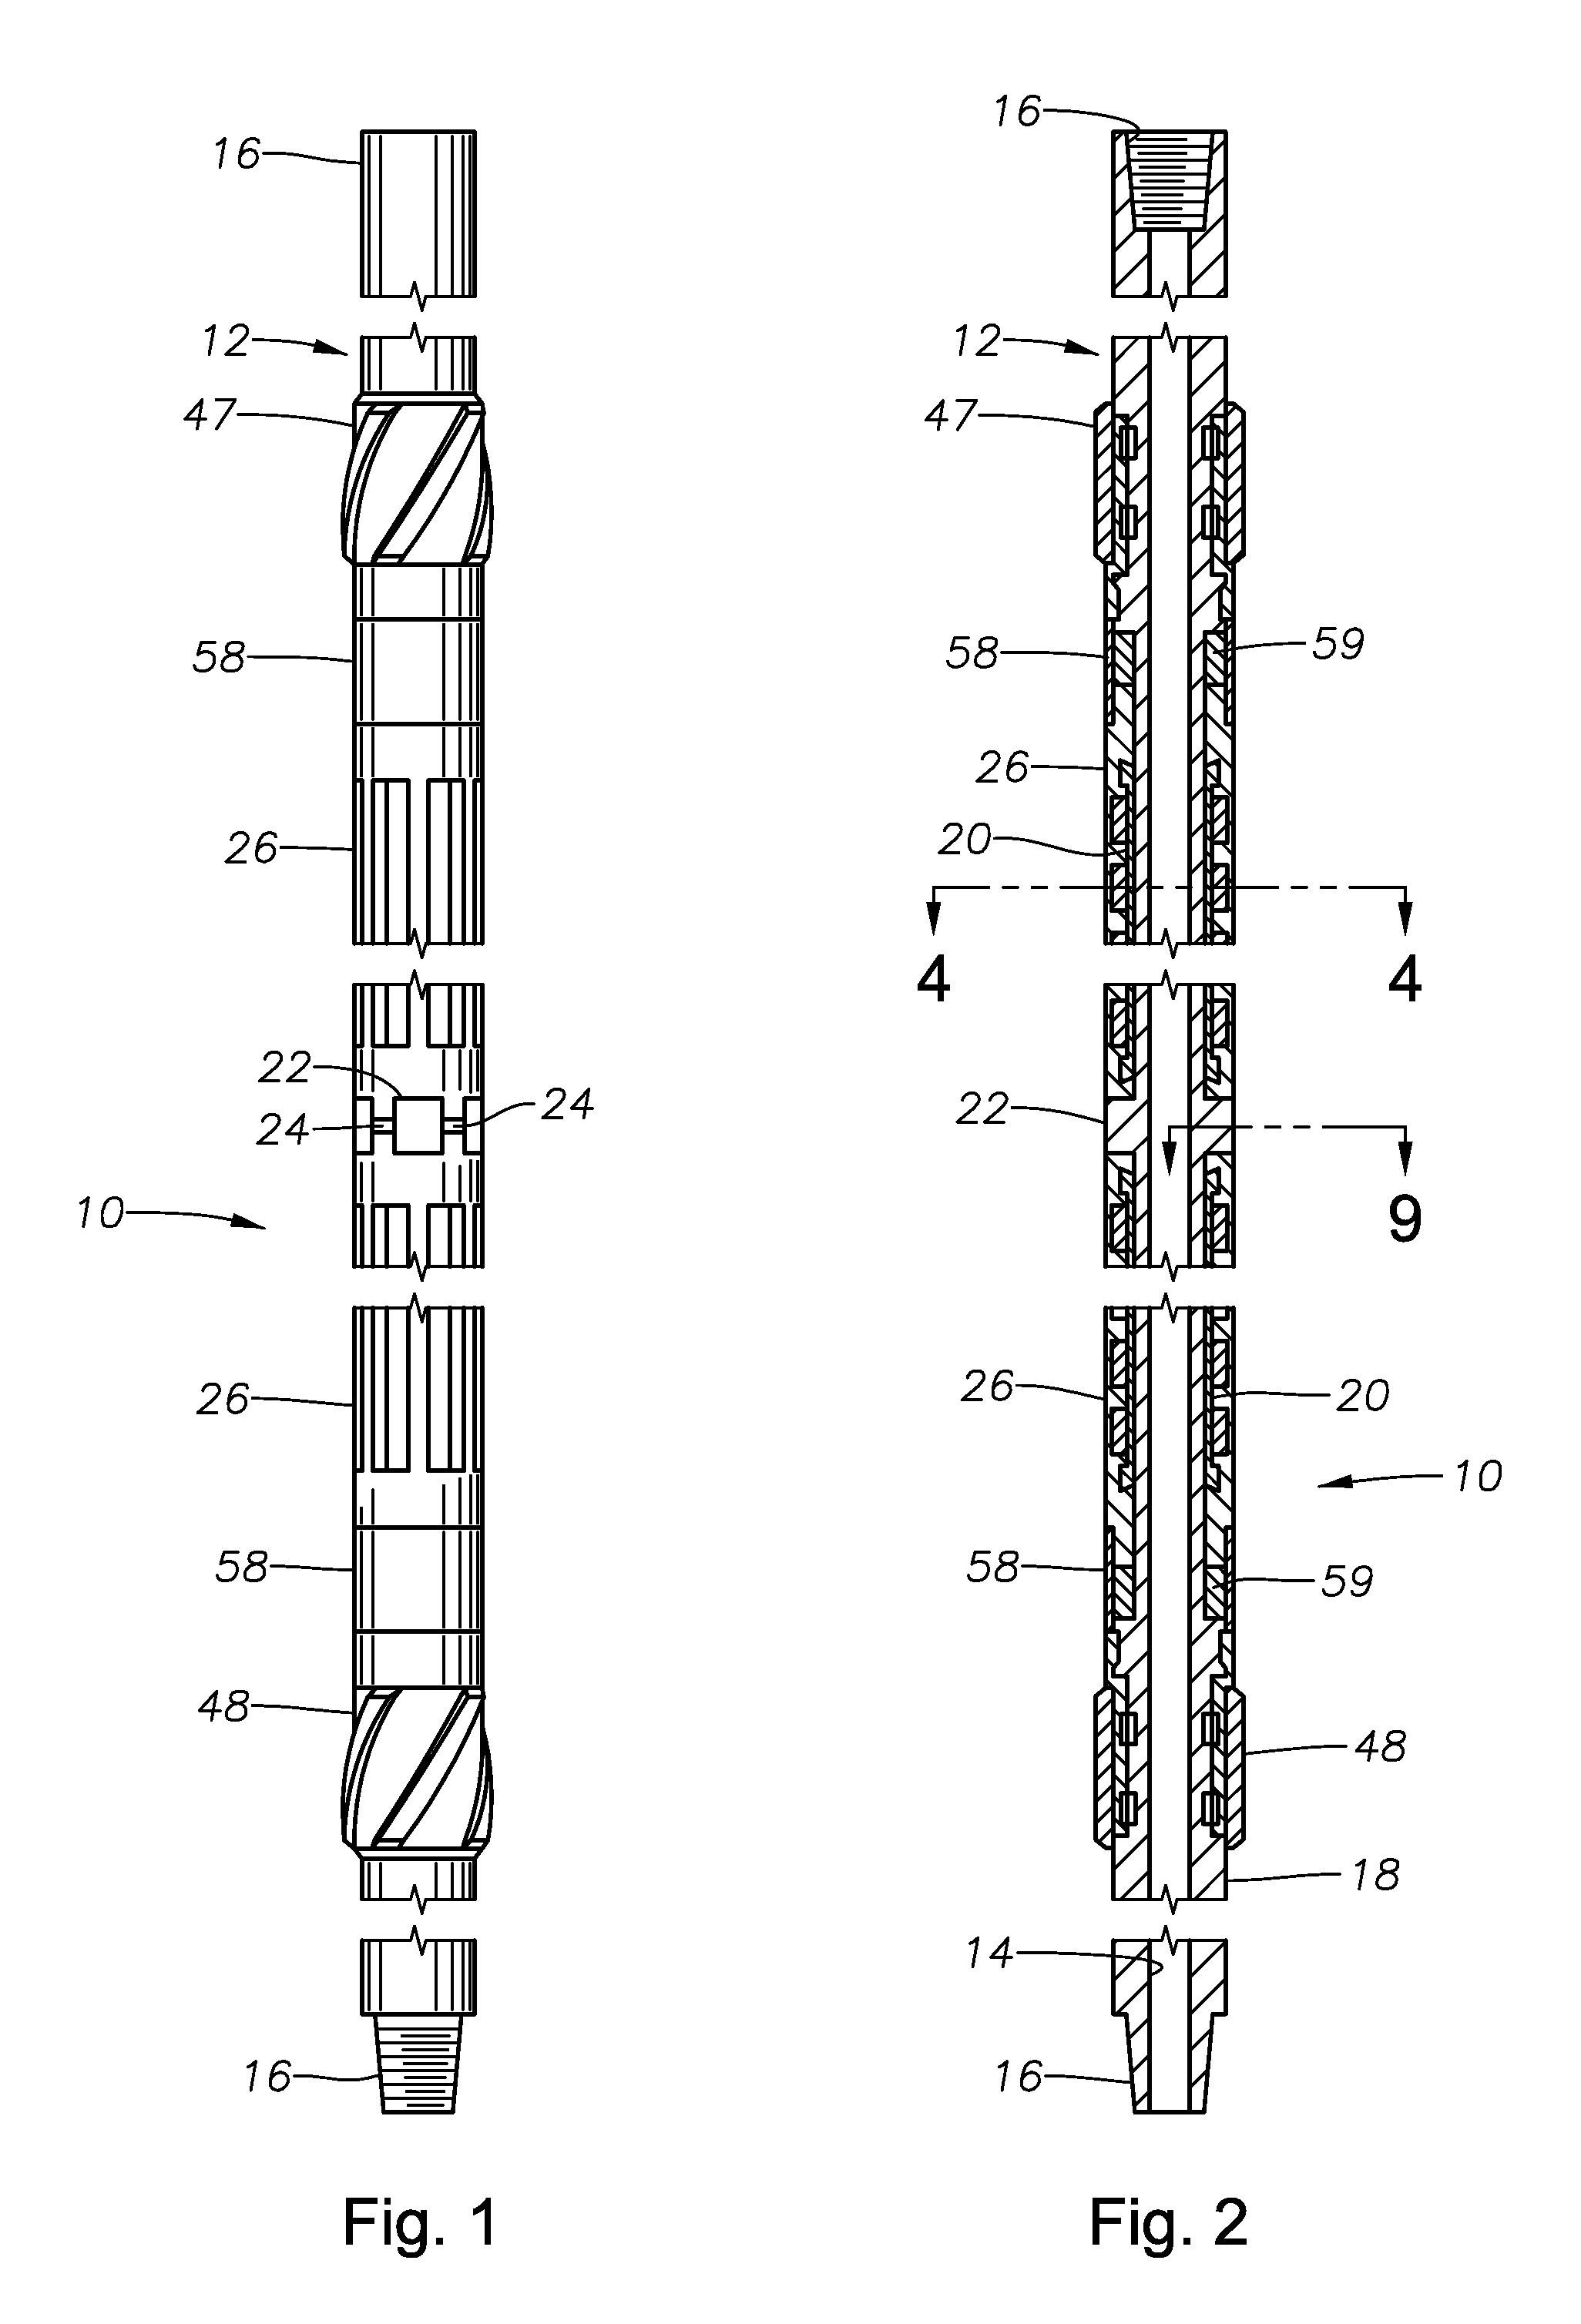 Retaining and Isolating Mechanisms for Magnets in a Magnetic Cleaning Tool